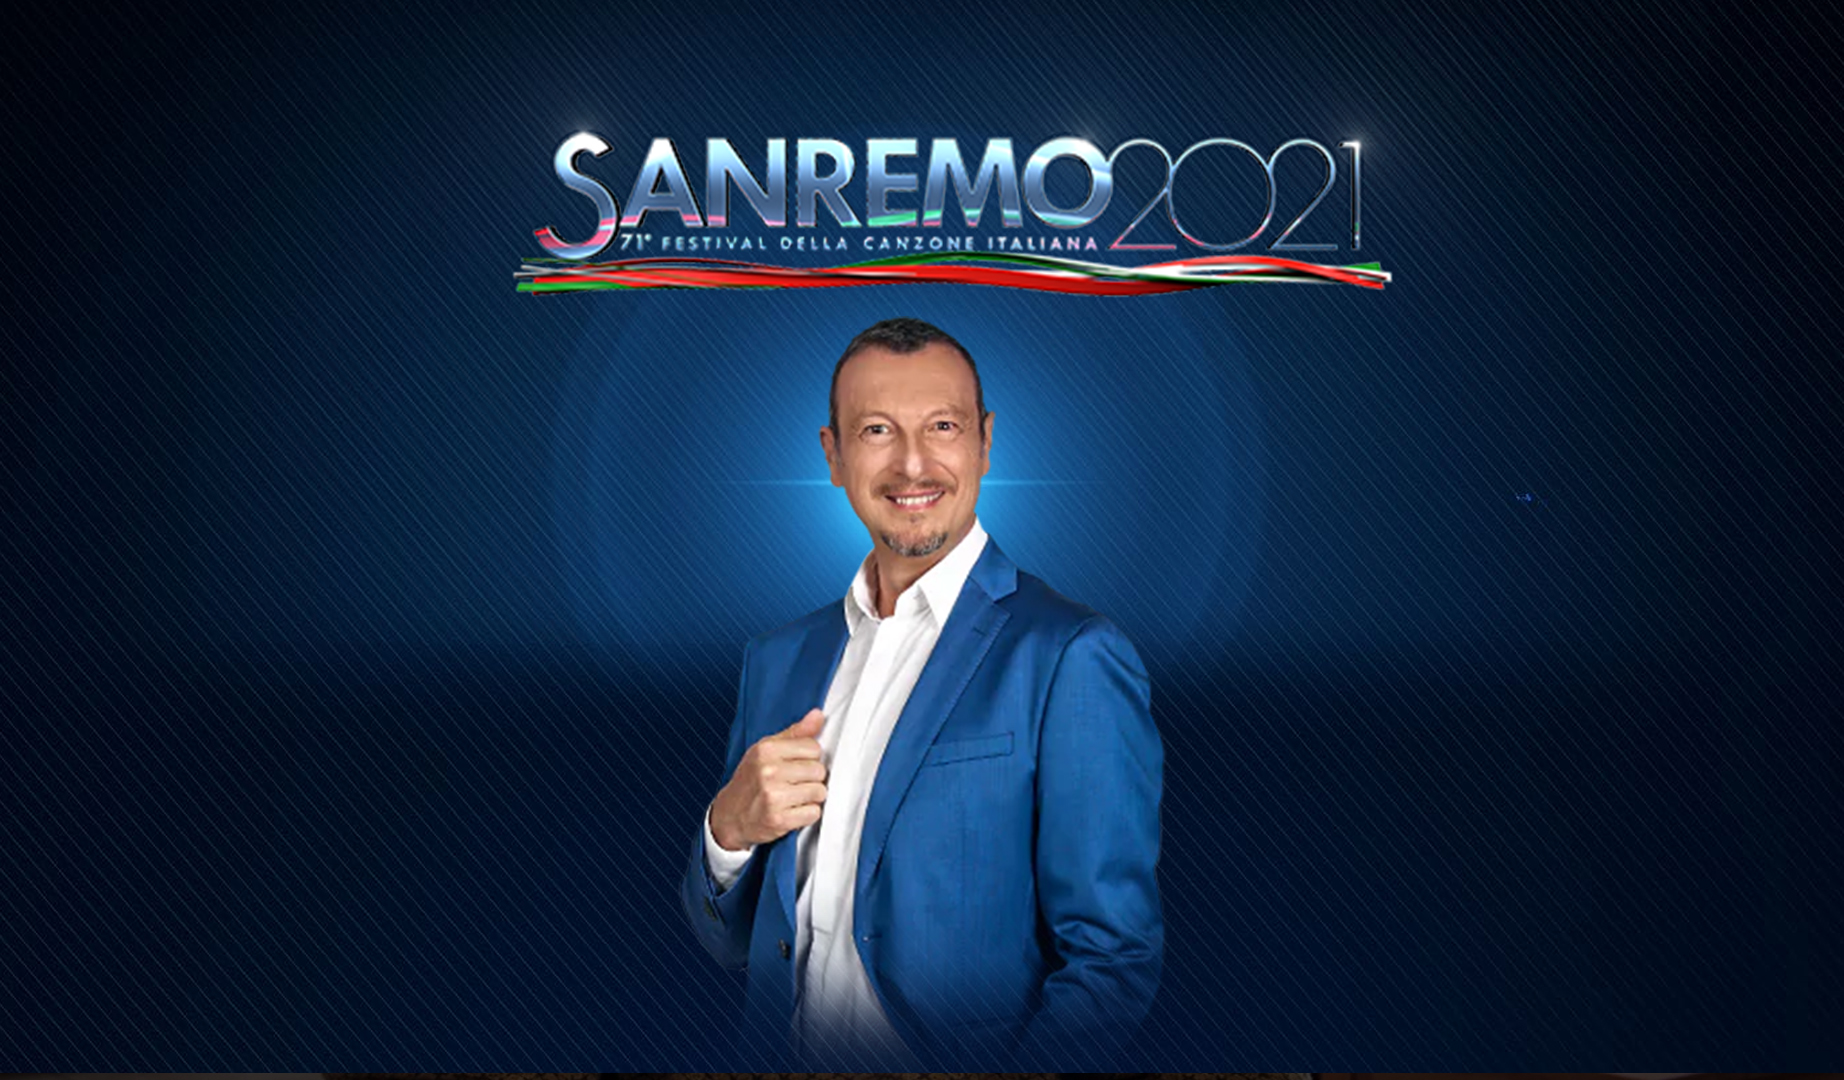 Italy: Listen to the first 13 songs competing in Sanremo 2021!